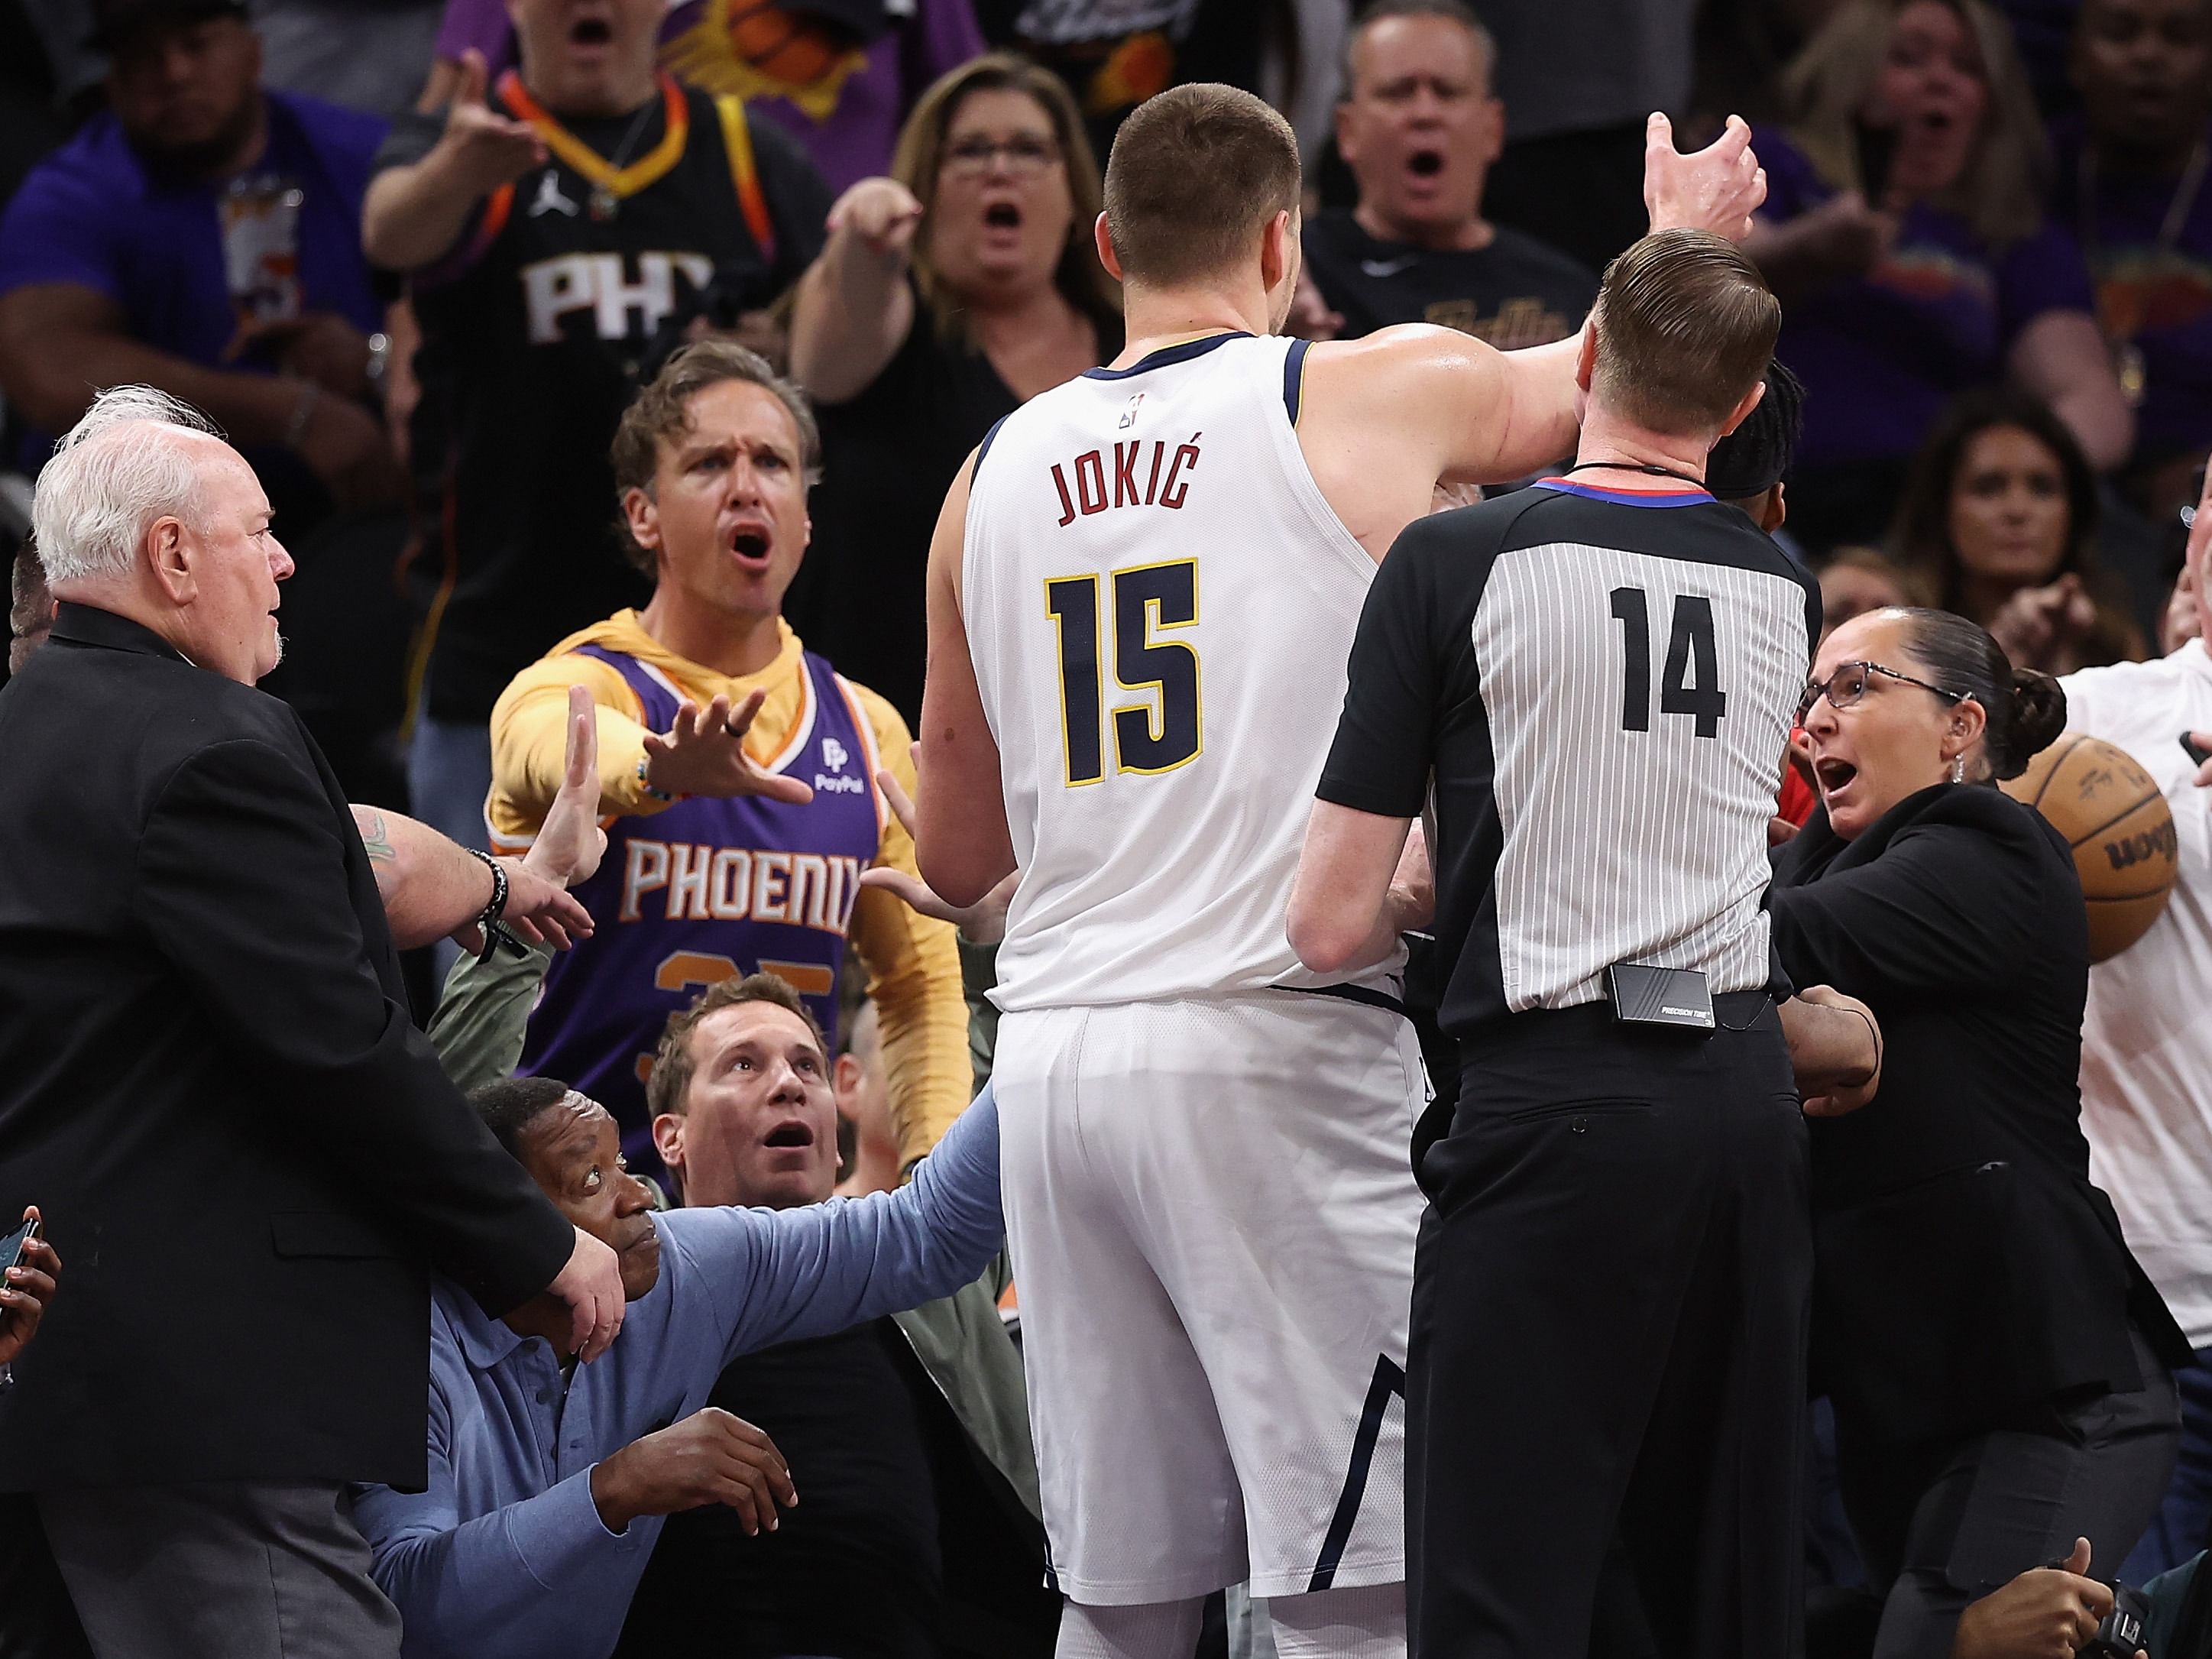 Nikola Jokic and Suns owner Mat Ishbia engaged in an altercation